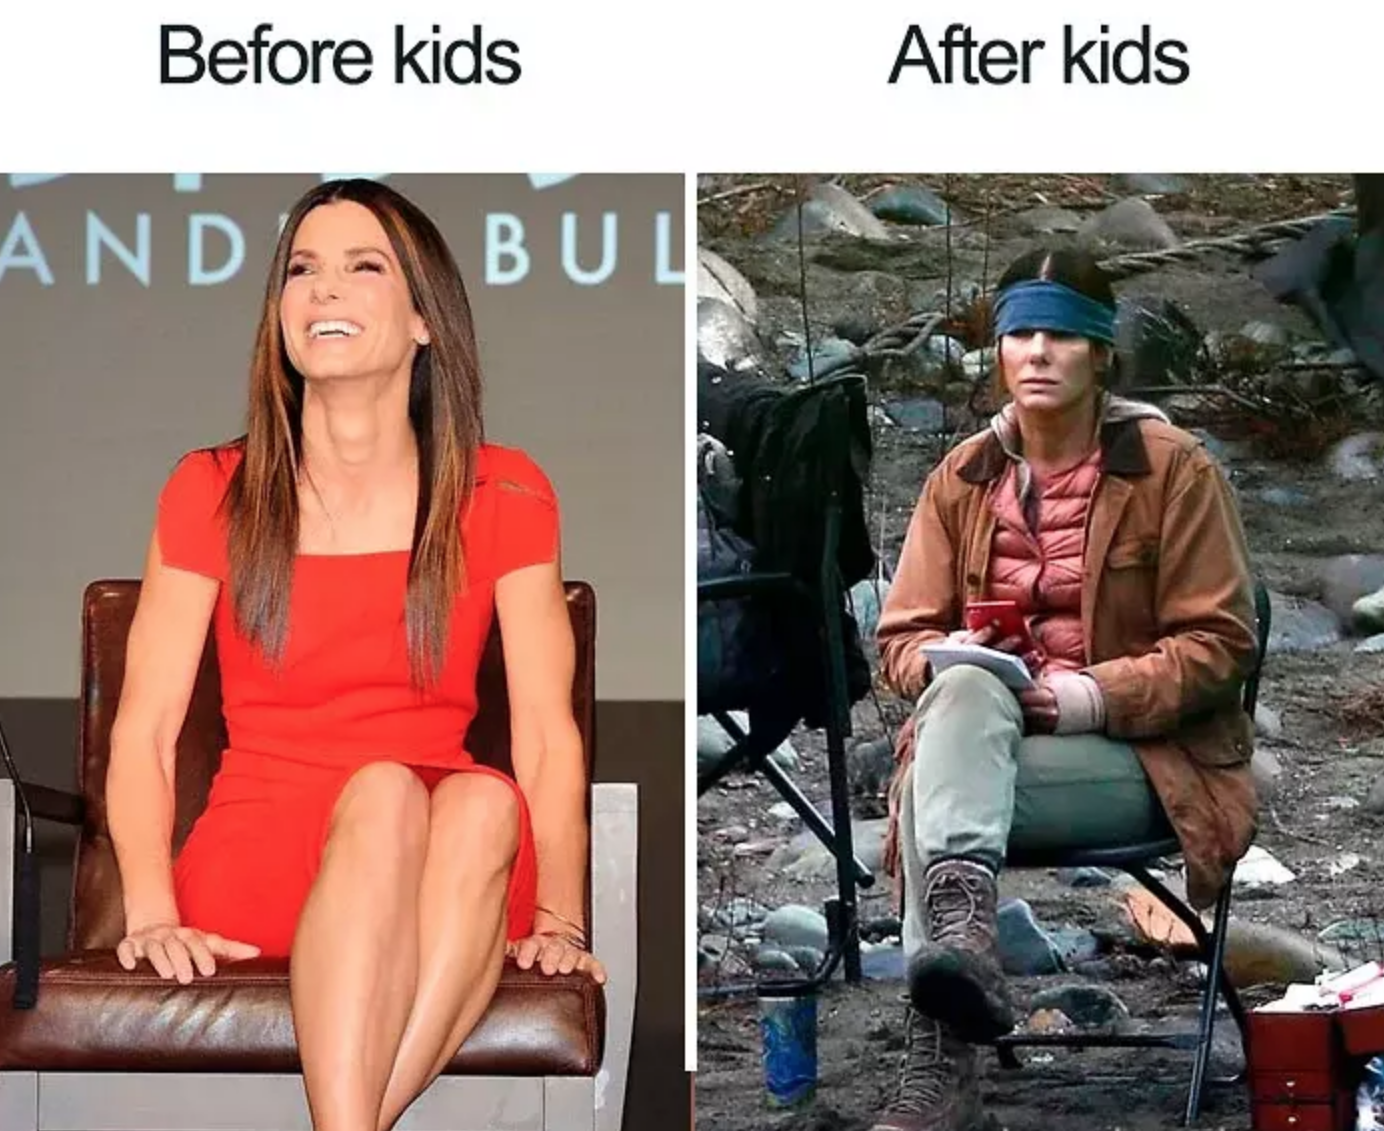 Before and after kids